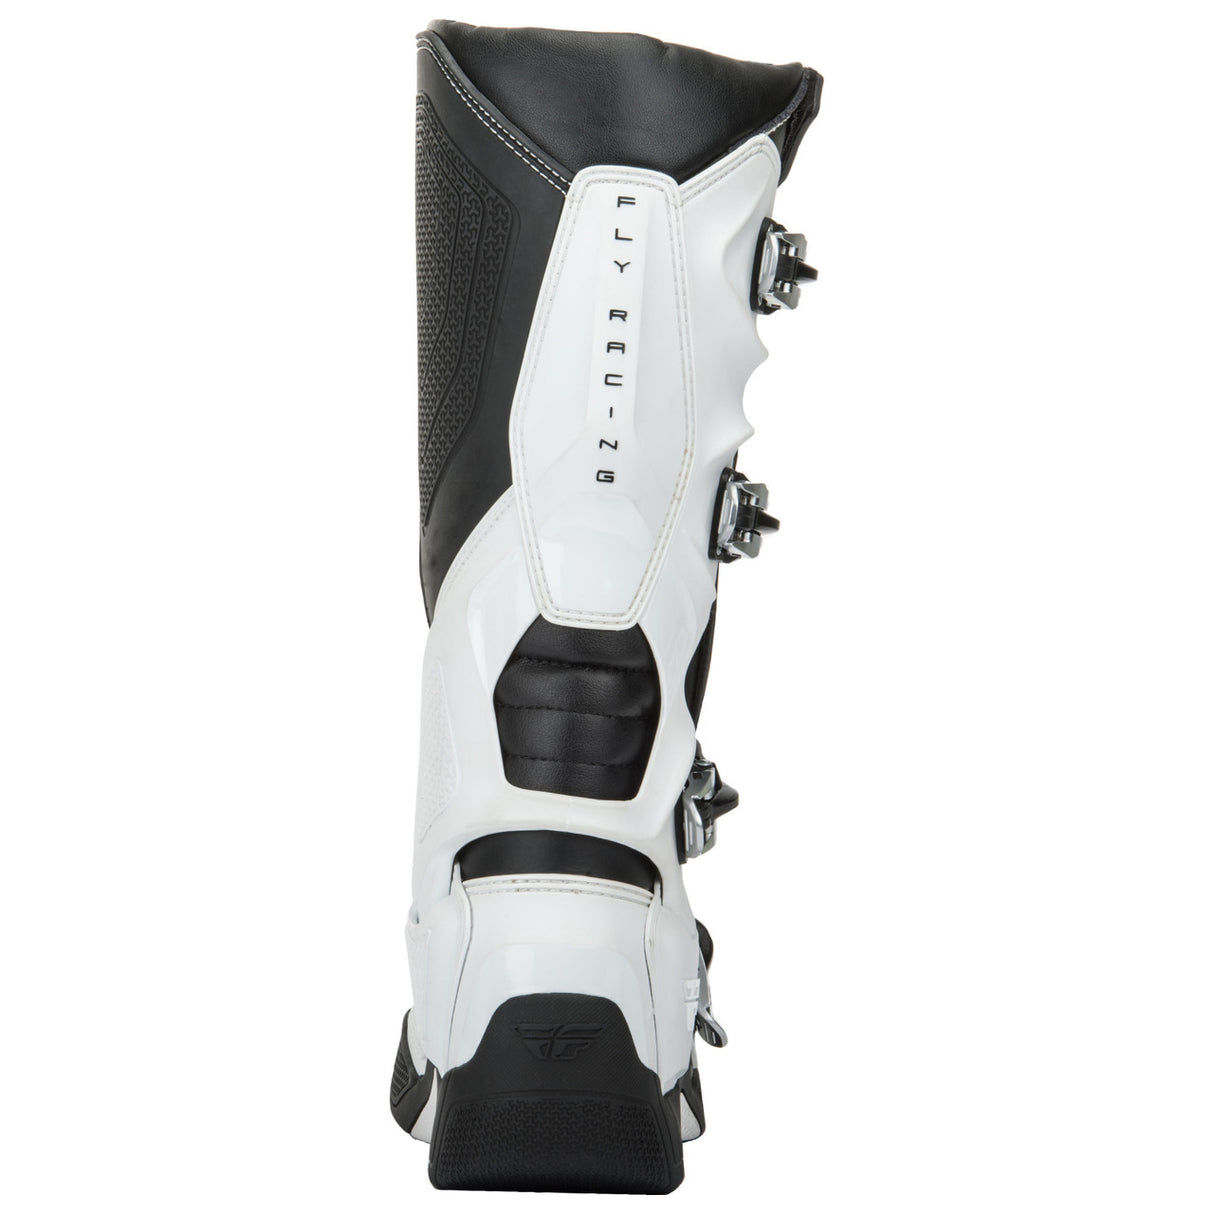 Fly Racing Fly FR5 Adult Boot